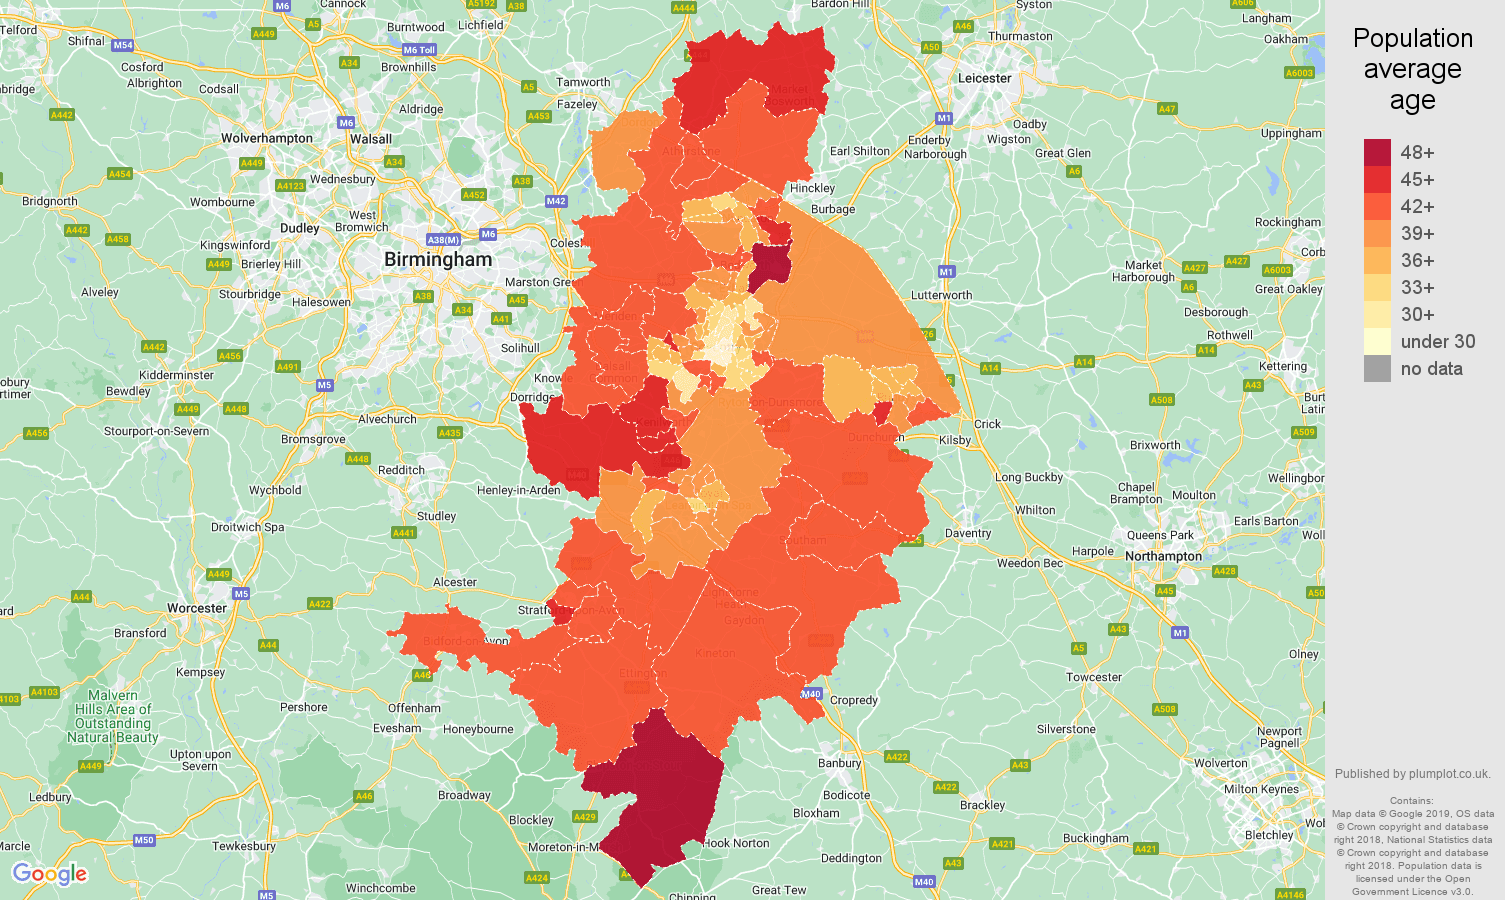 Coventry population average age map